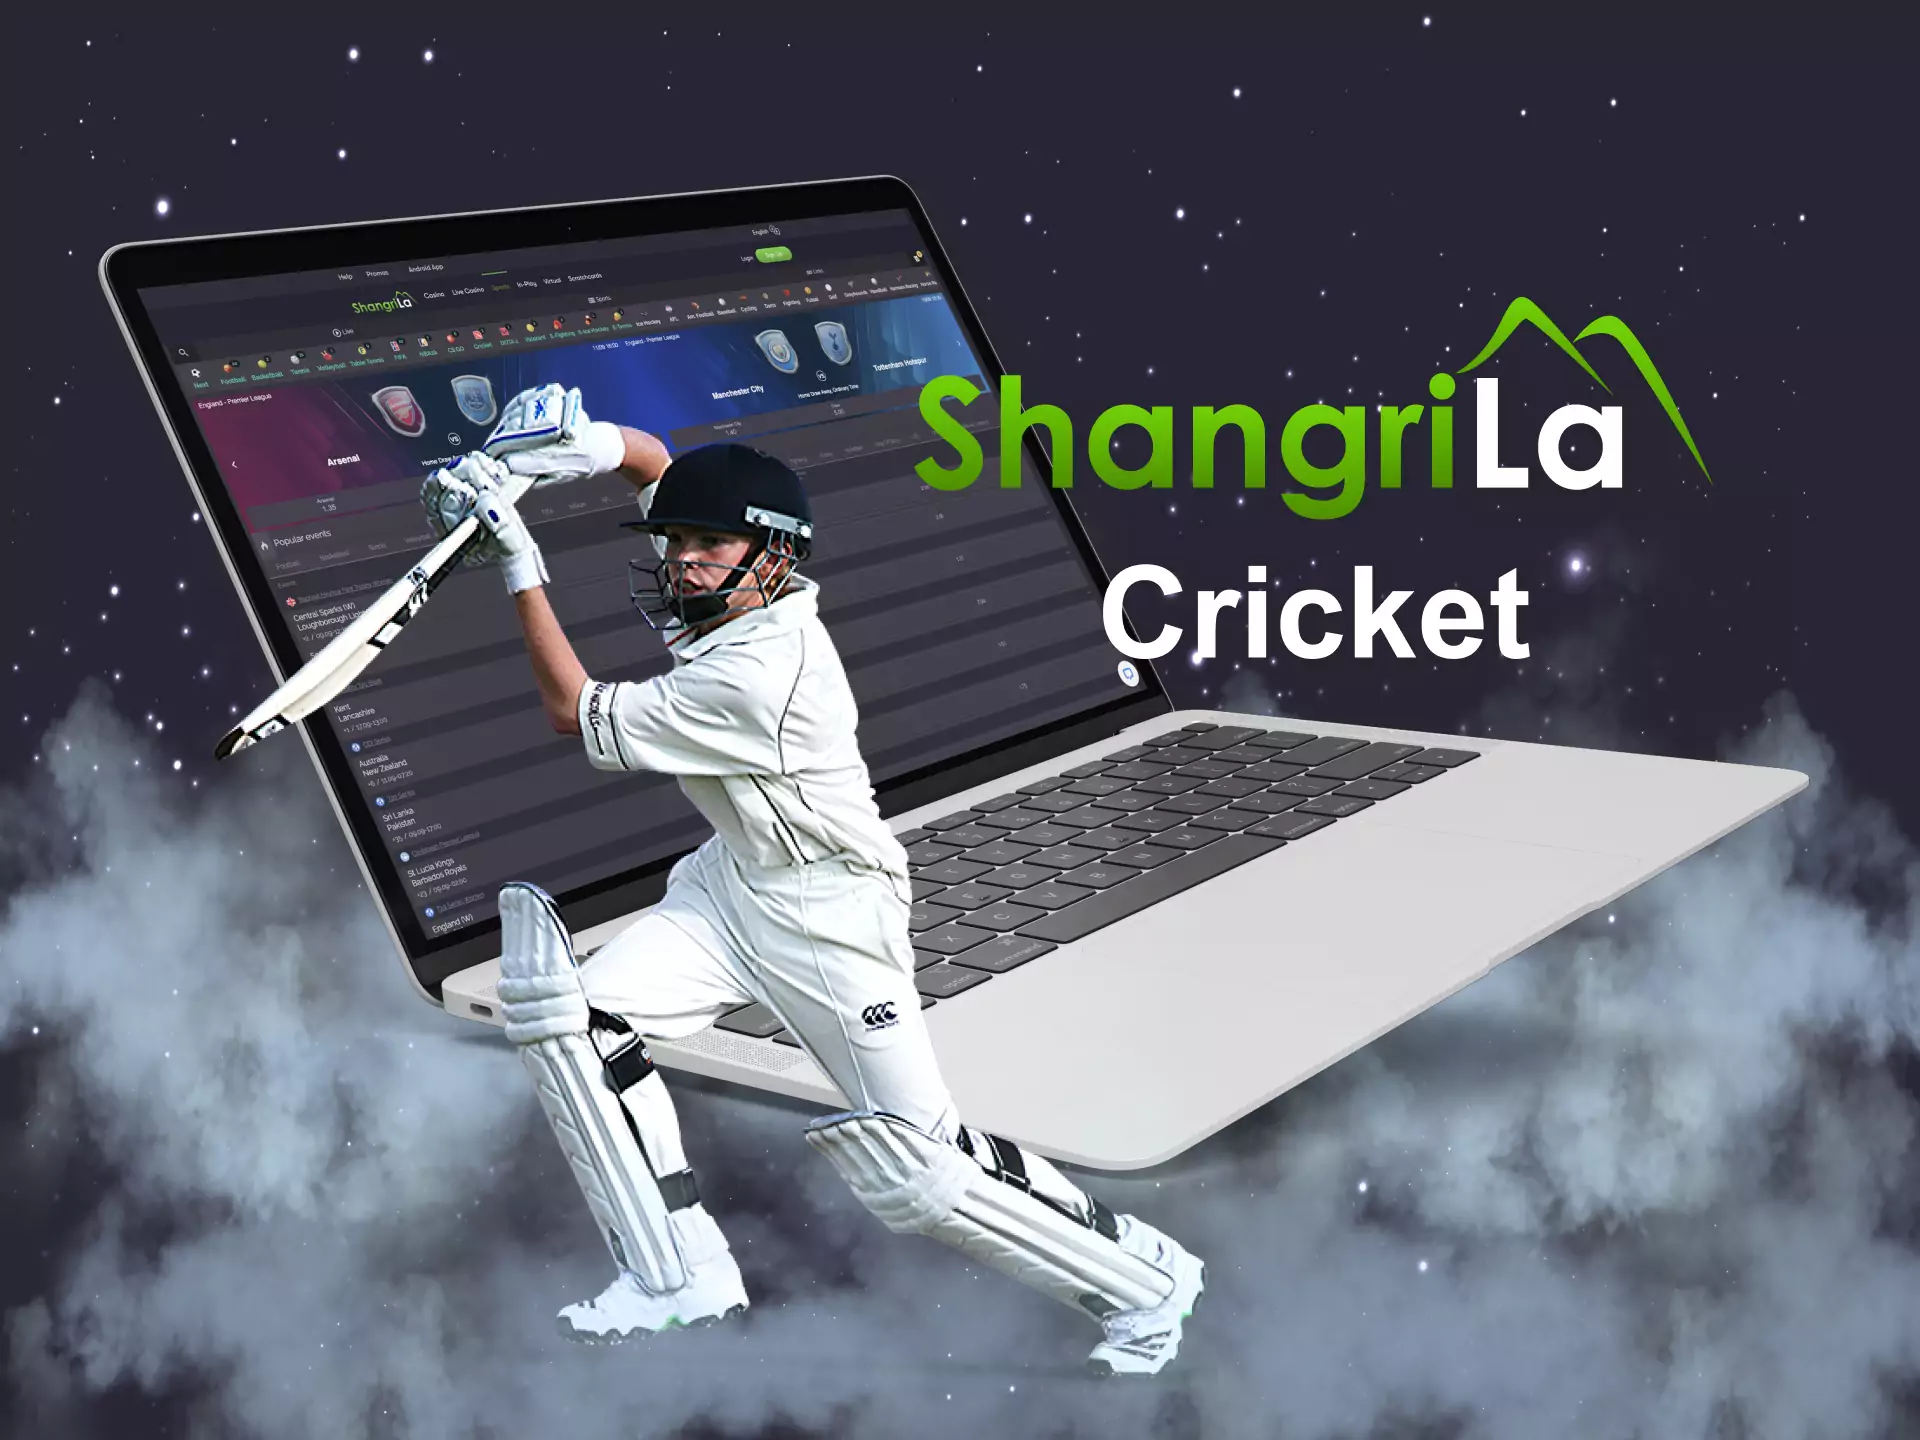 Cricket betting is the most popular stream among Indian users of Shangri La.